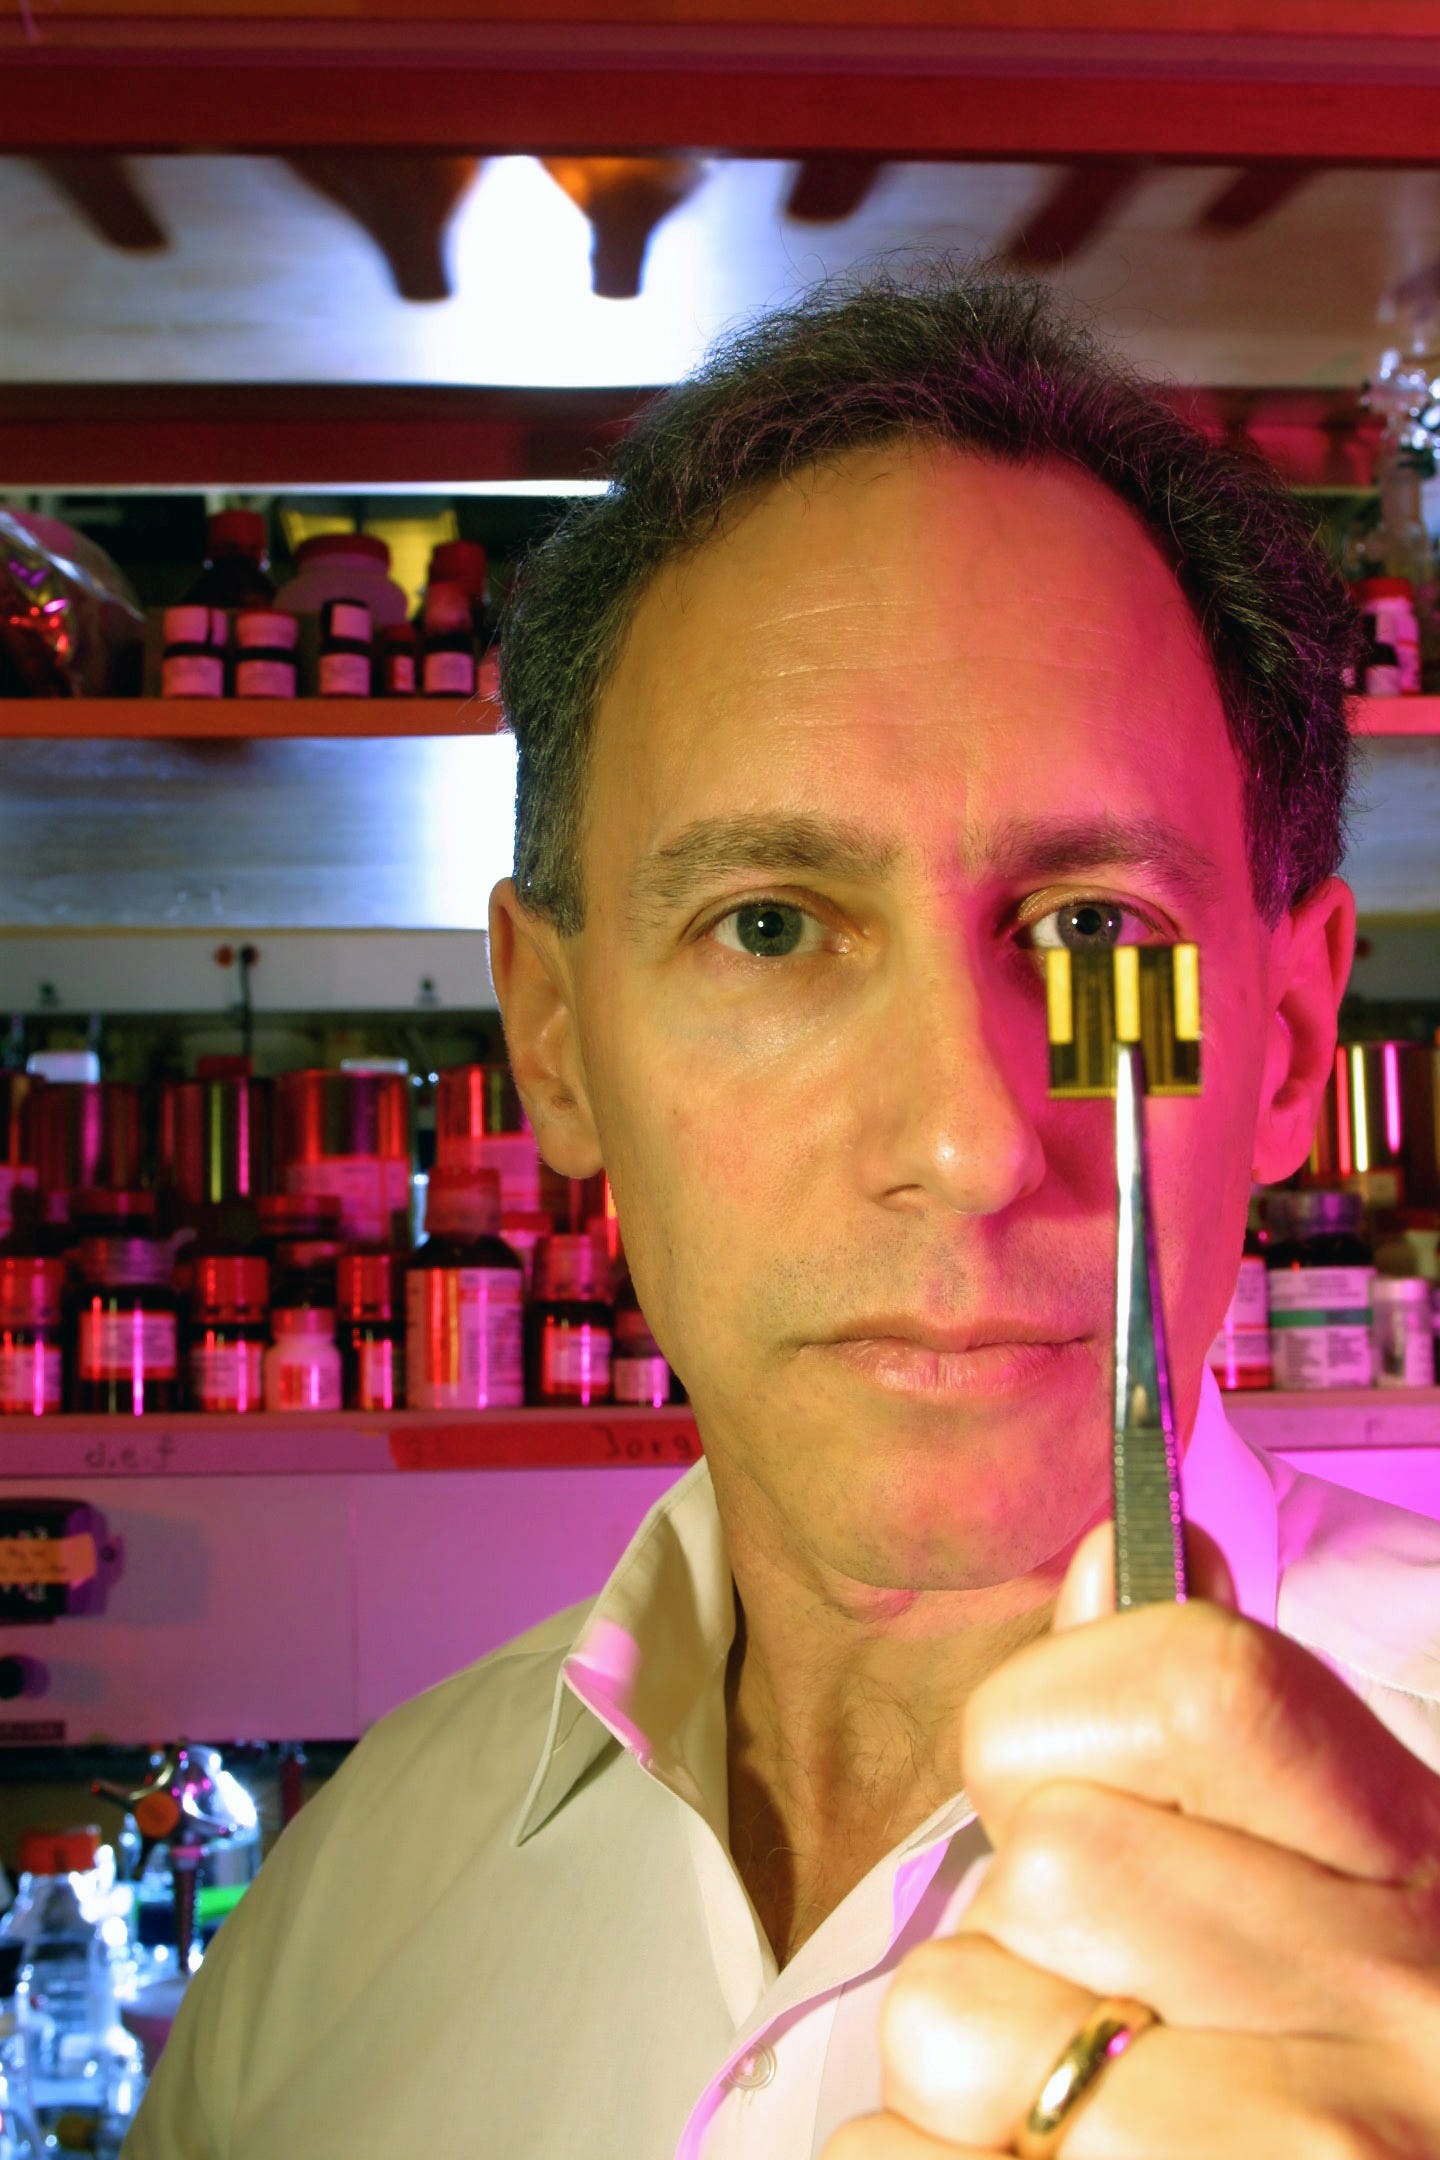 Professor Robert Langer displays one of the implant devices he has invented to deliver medication. (© Rick Friedman/Corbis)